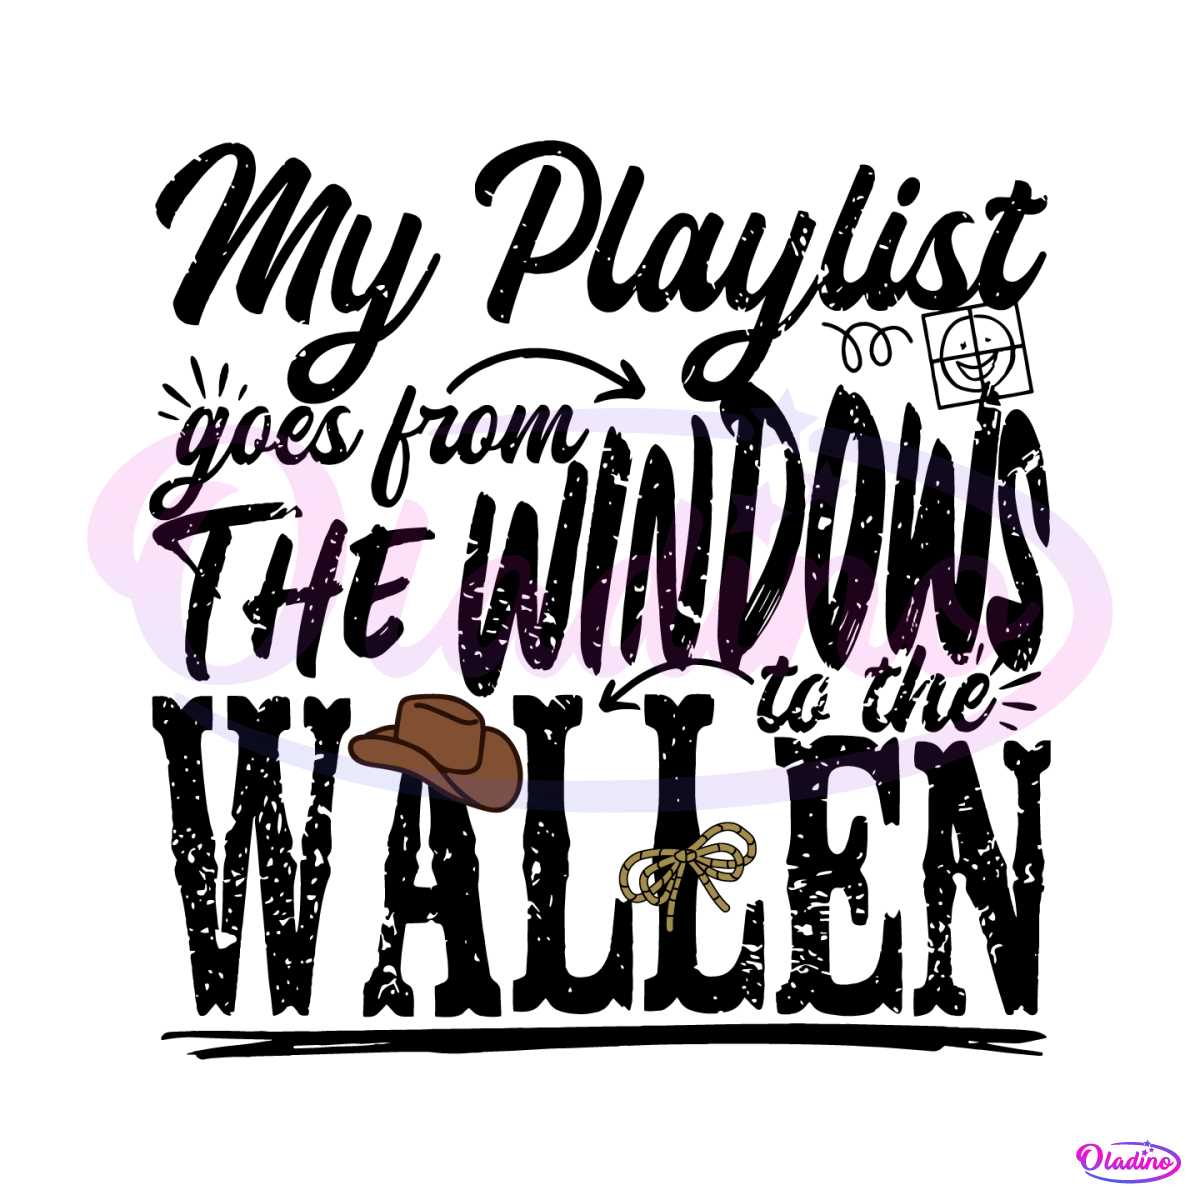 my-playlist-goes-from-the-windows-to-the-wallen-svg